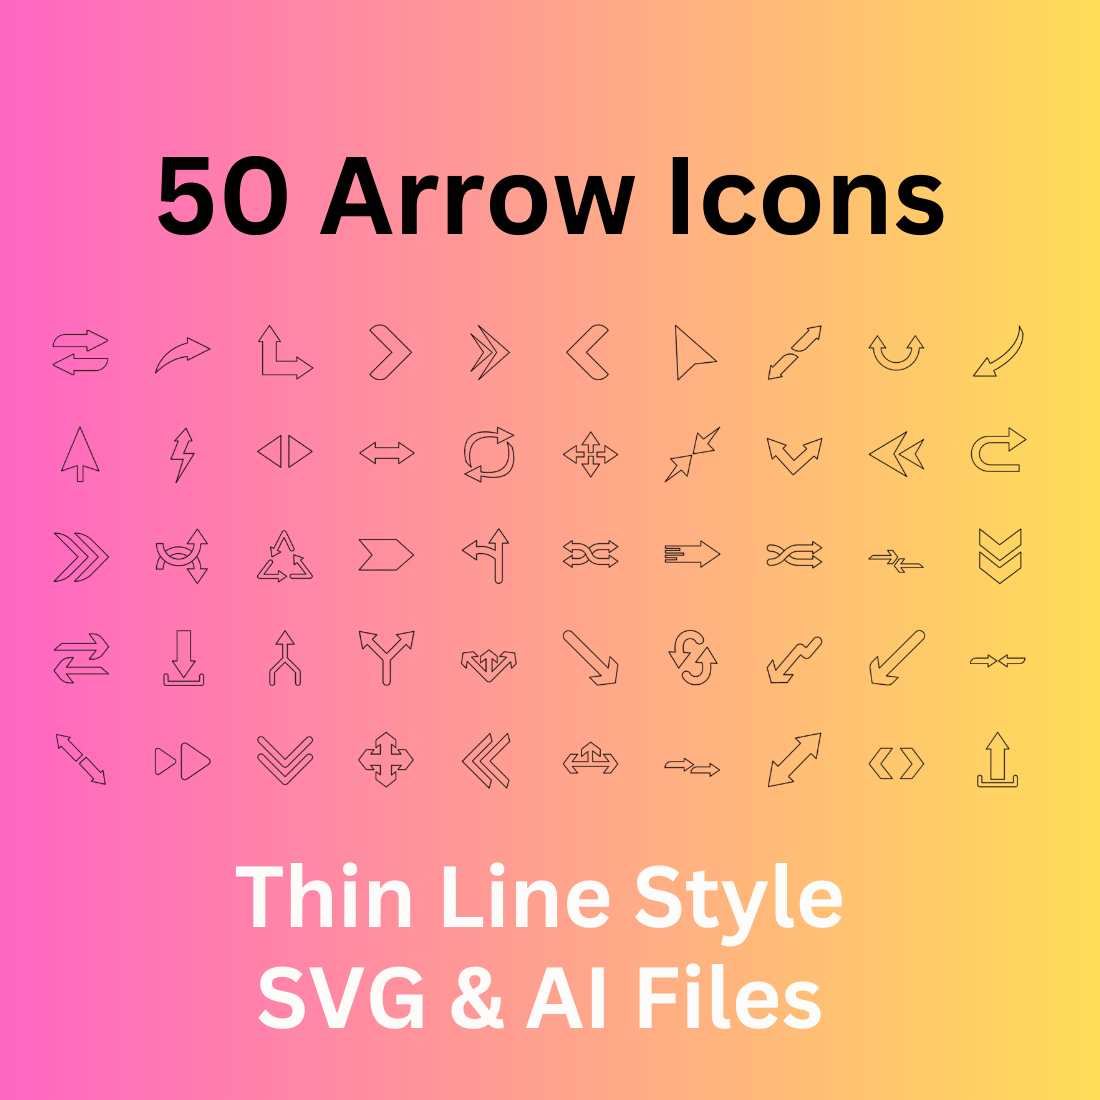 Arrows Icon Set 50 Outline Icons - SVG And AI Files cover image.